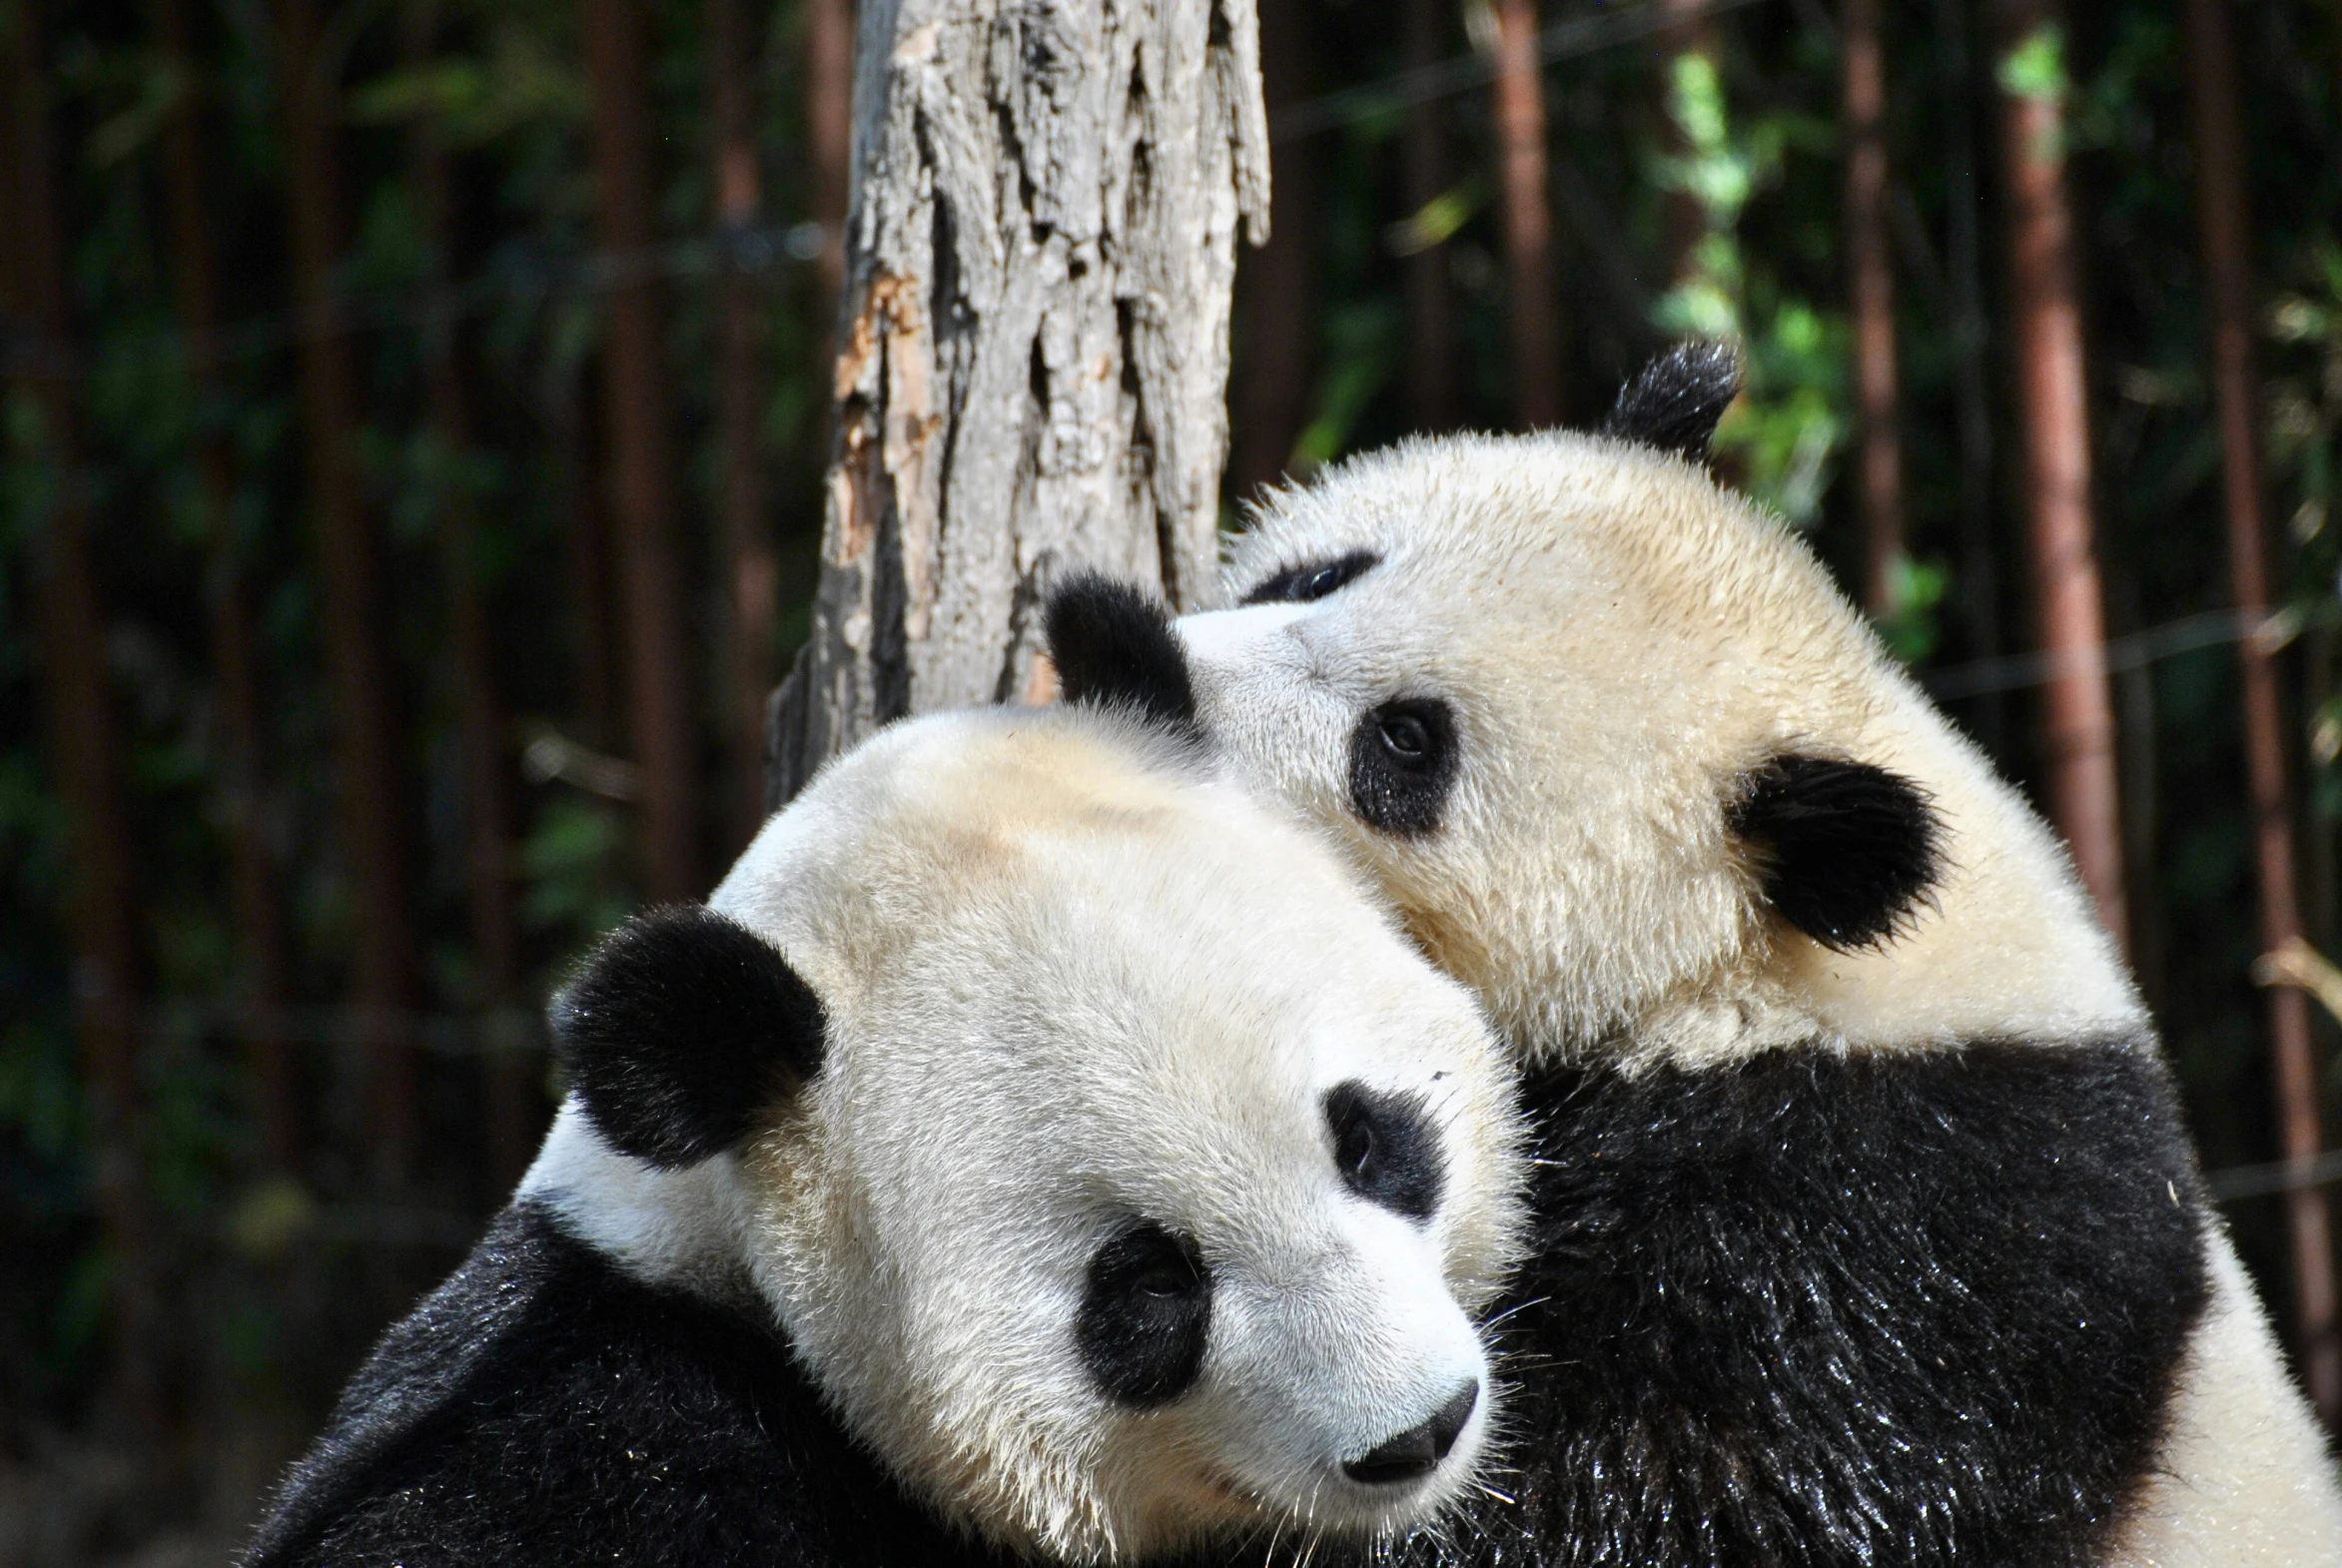 two panda bears cuddling up next to each other in their enclosure